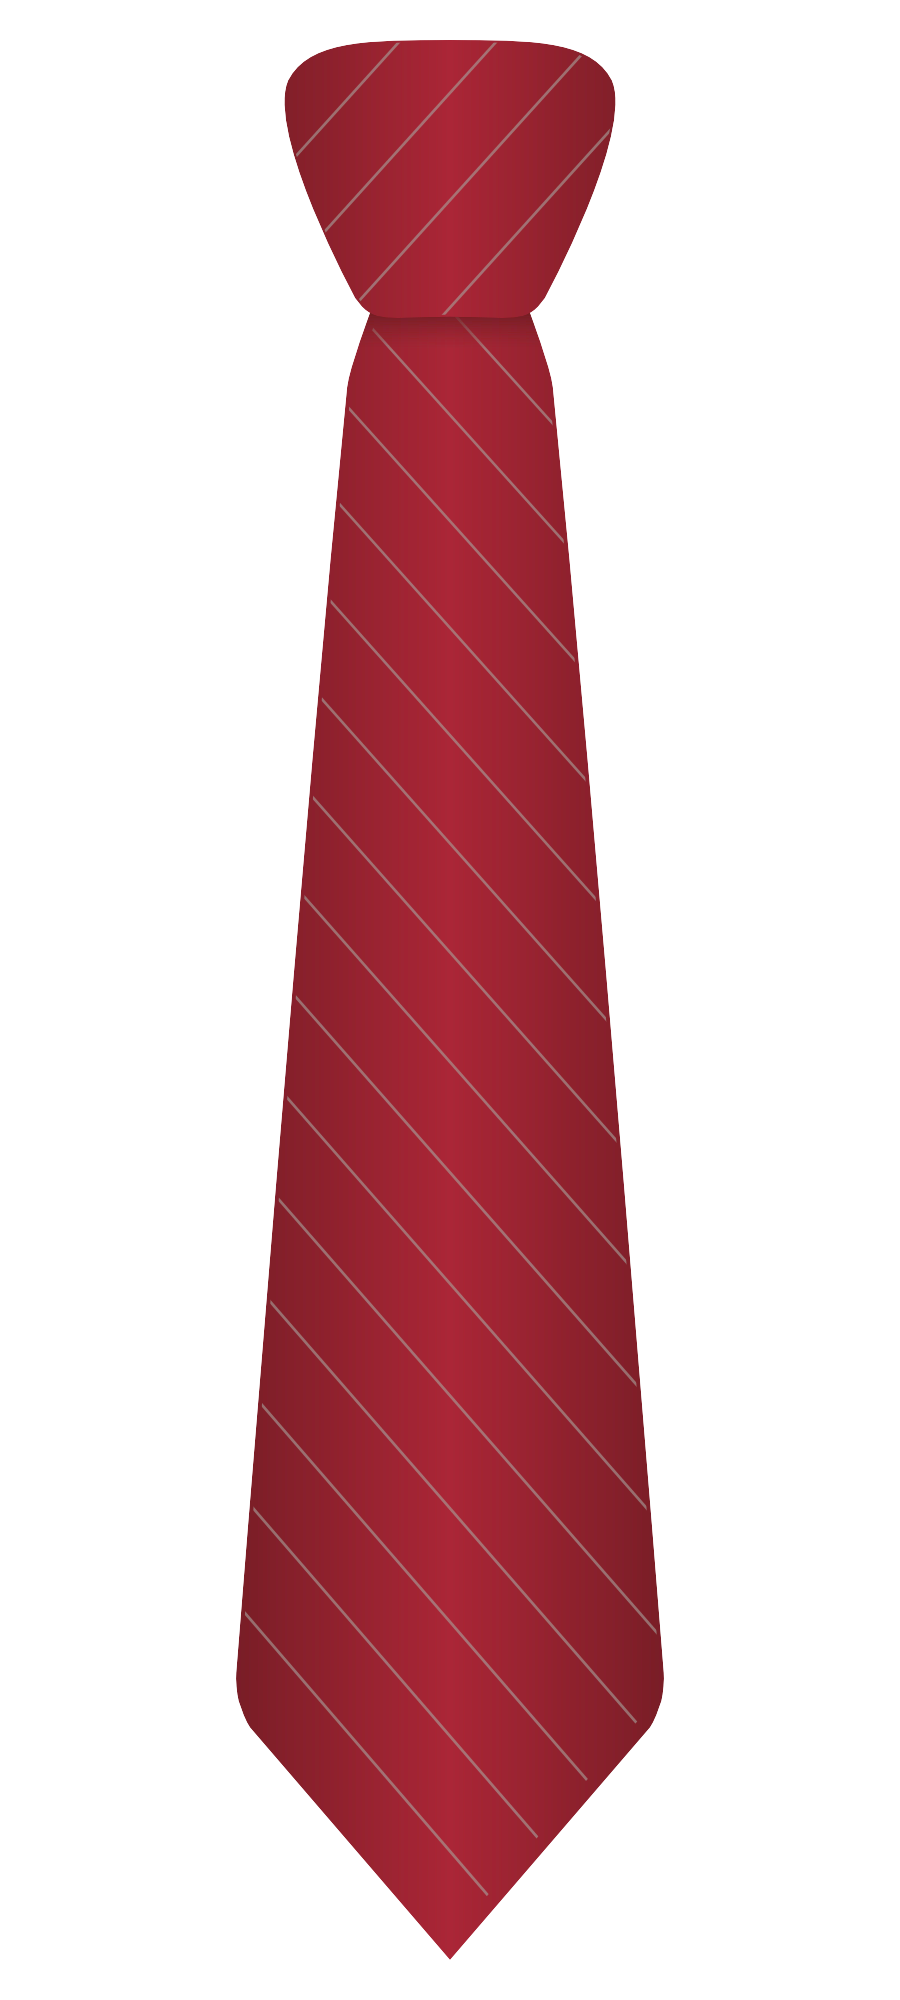 Red Tie Png image #42571